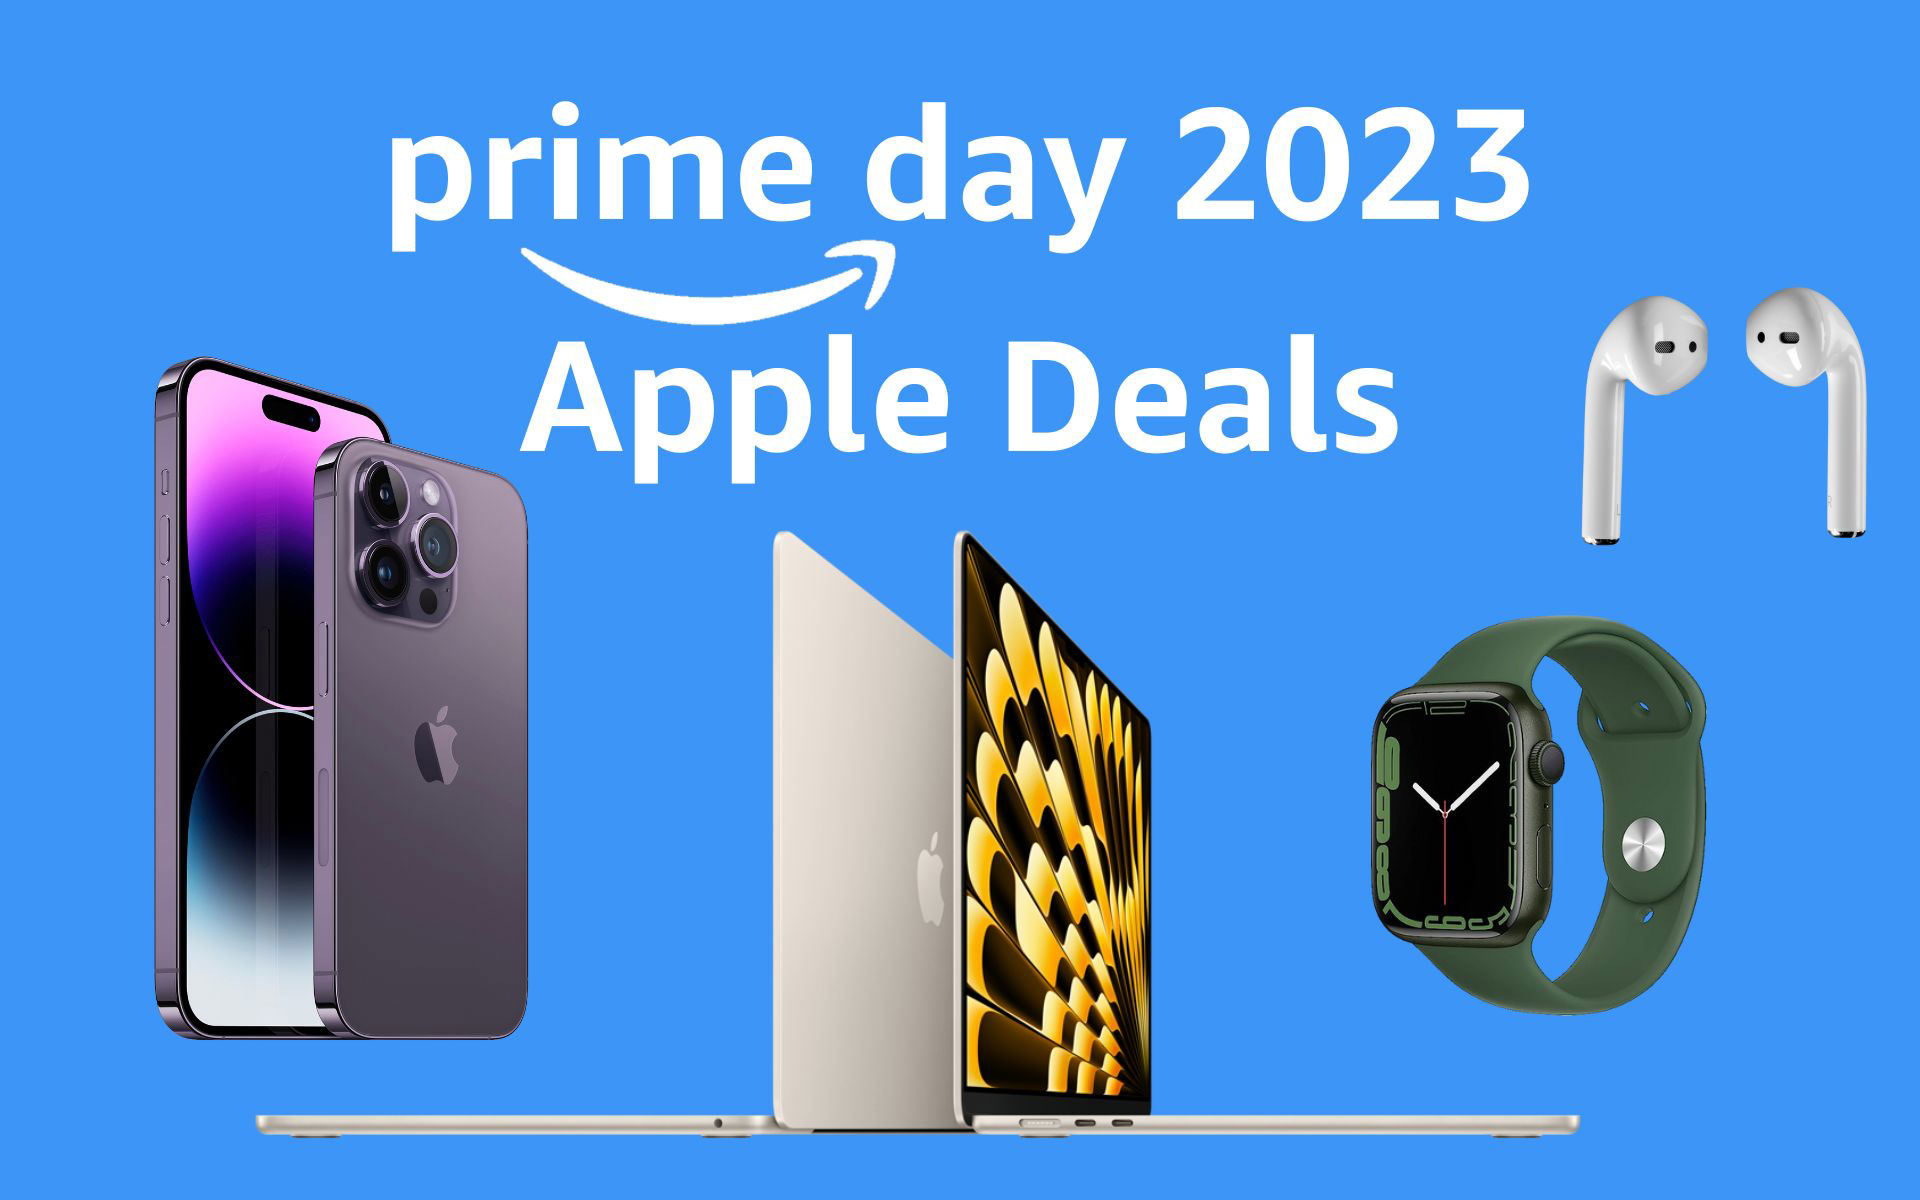 Prime Day Apple Deals AirPods, iPads, iPhones, MacBooks, and Apple